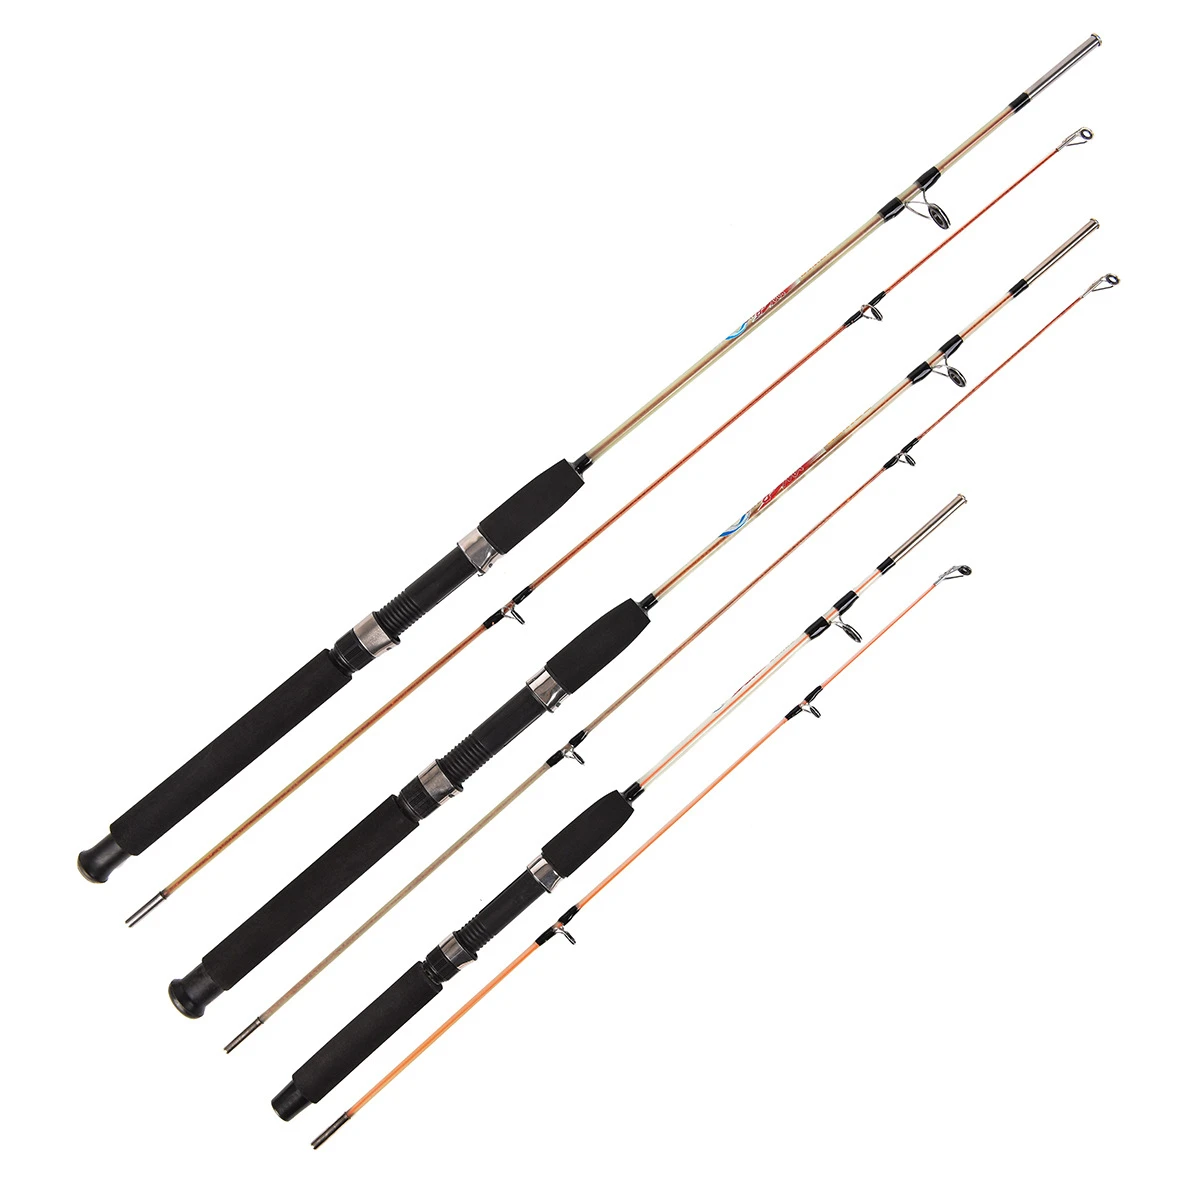 High Quality Transparent Fiberglass 2-section Lure Fishing Rod 1.1M and 1.5M Are Available Applicable To Various Fish and Places